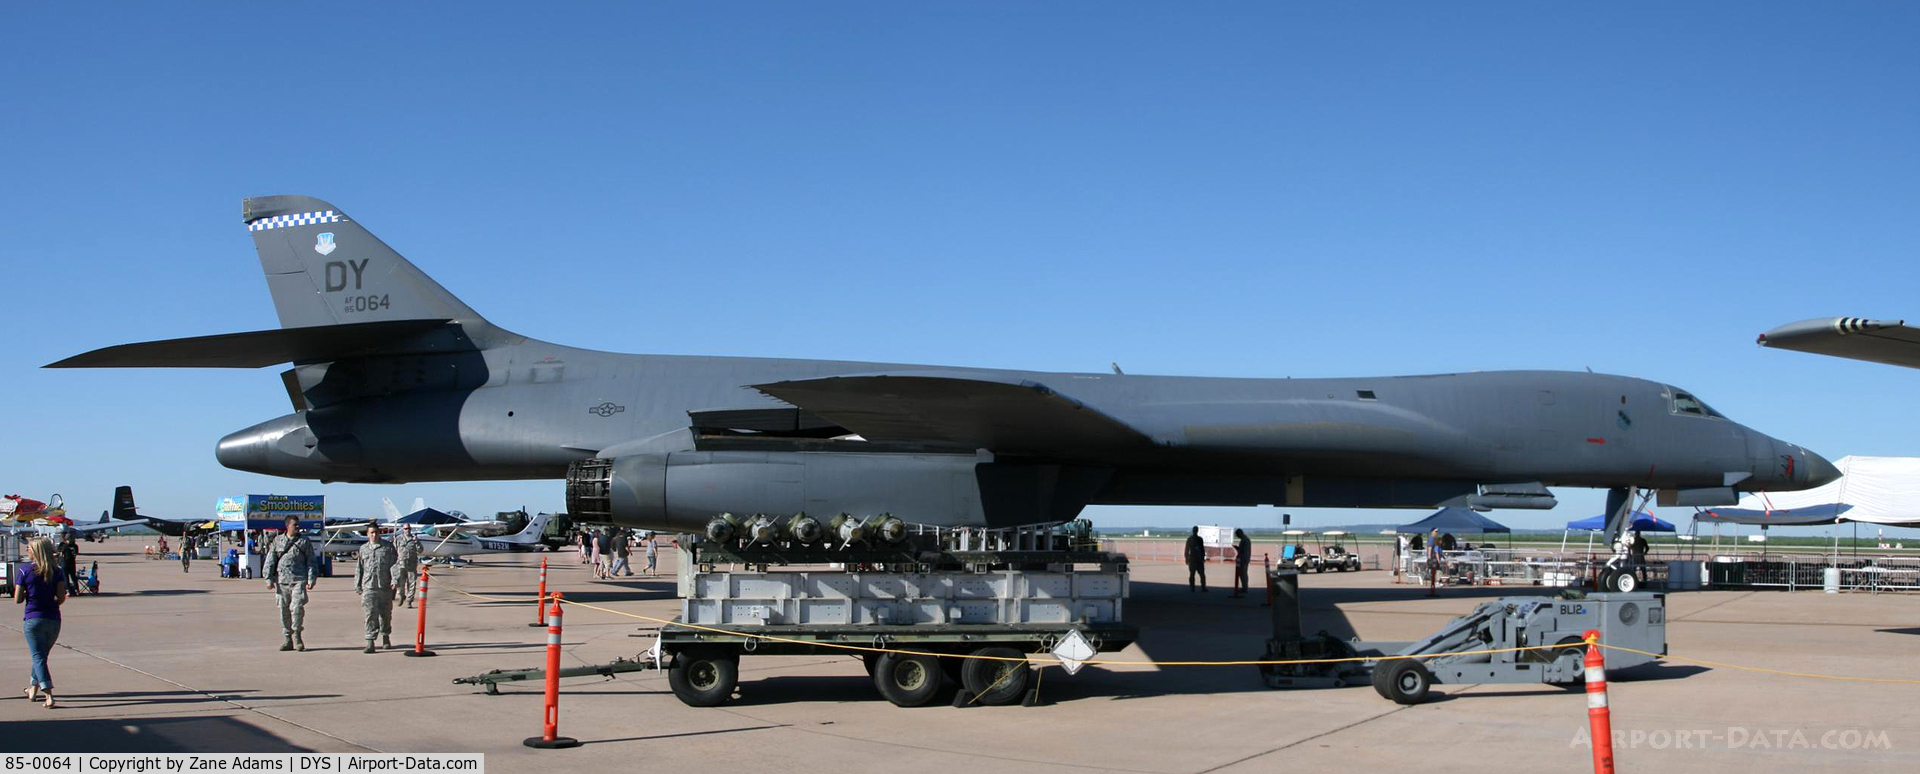 85-0064, 1985 Rockwell B-1B Lancer C/N 24, At the 2014 Big Country Airshow - Dyess AFB, TX